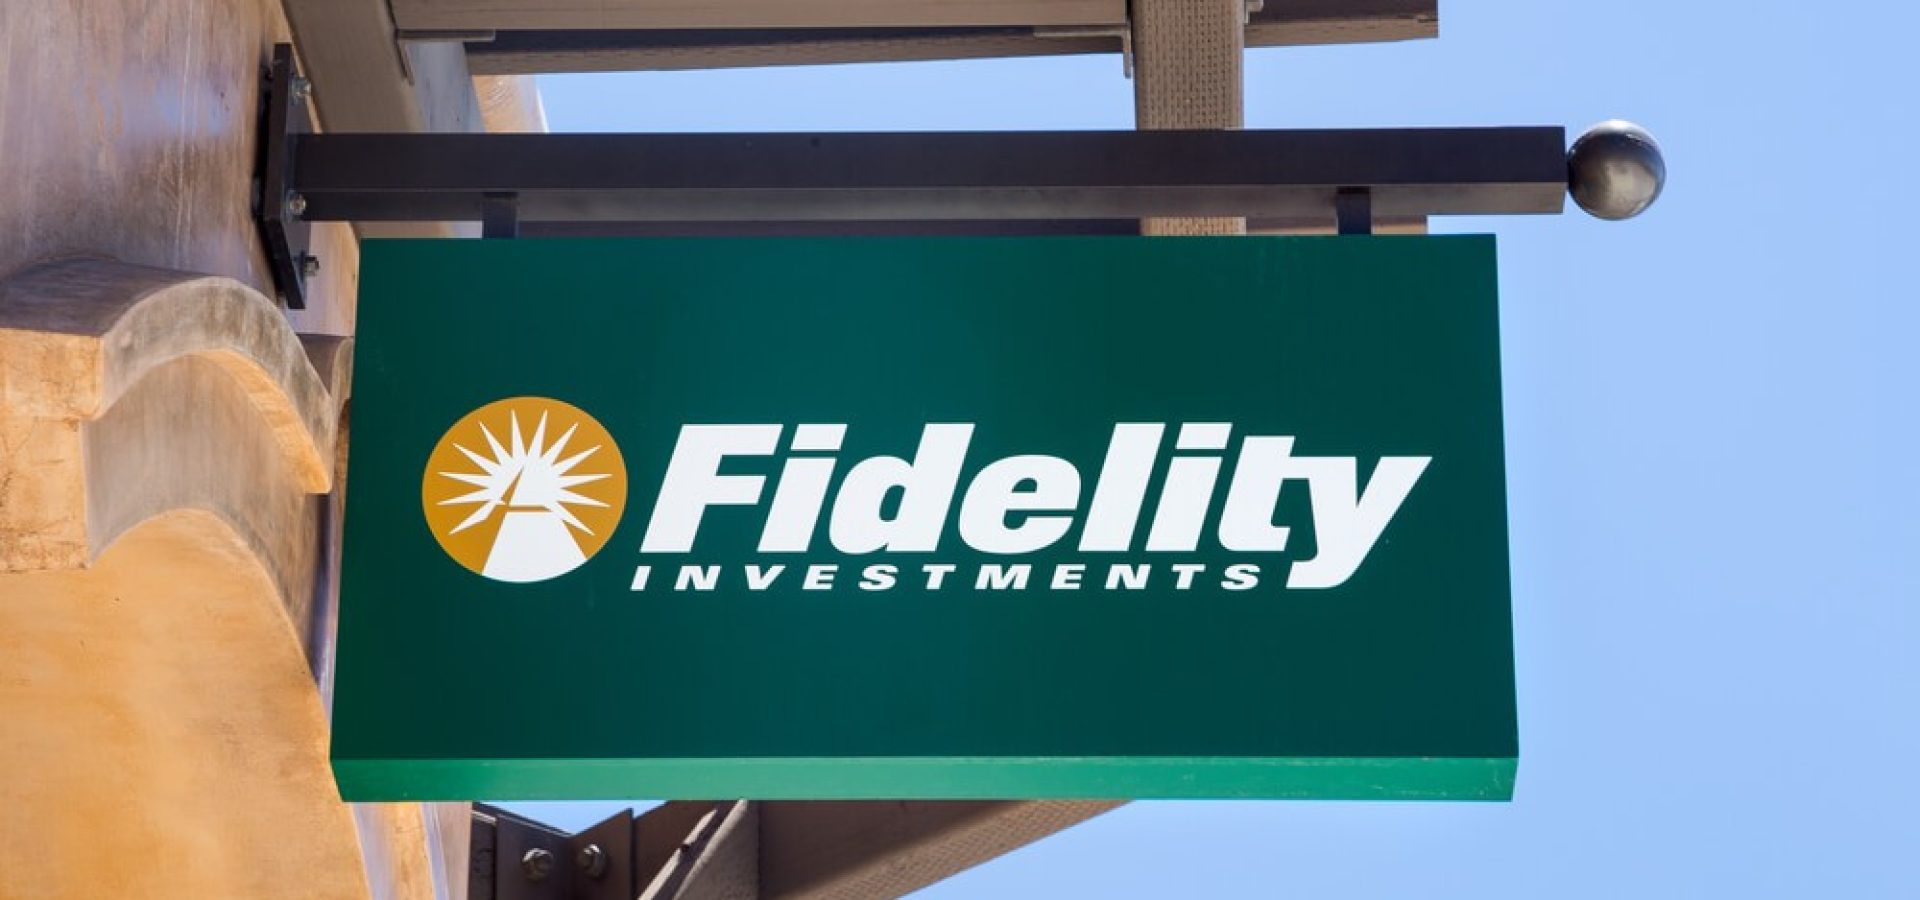 Fidelity Investments sign.